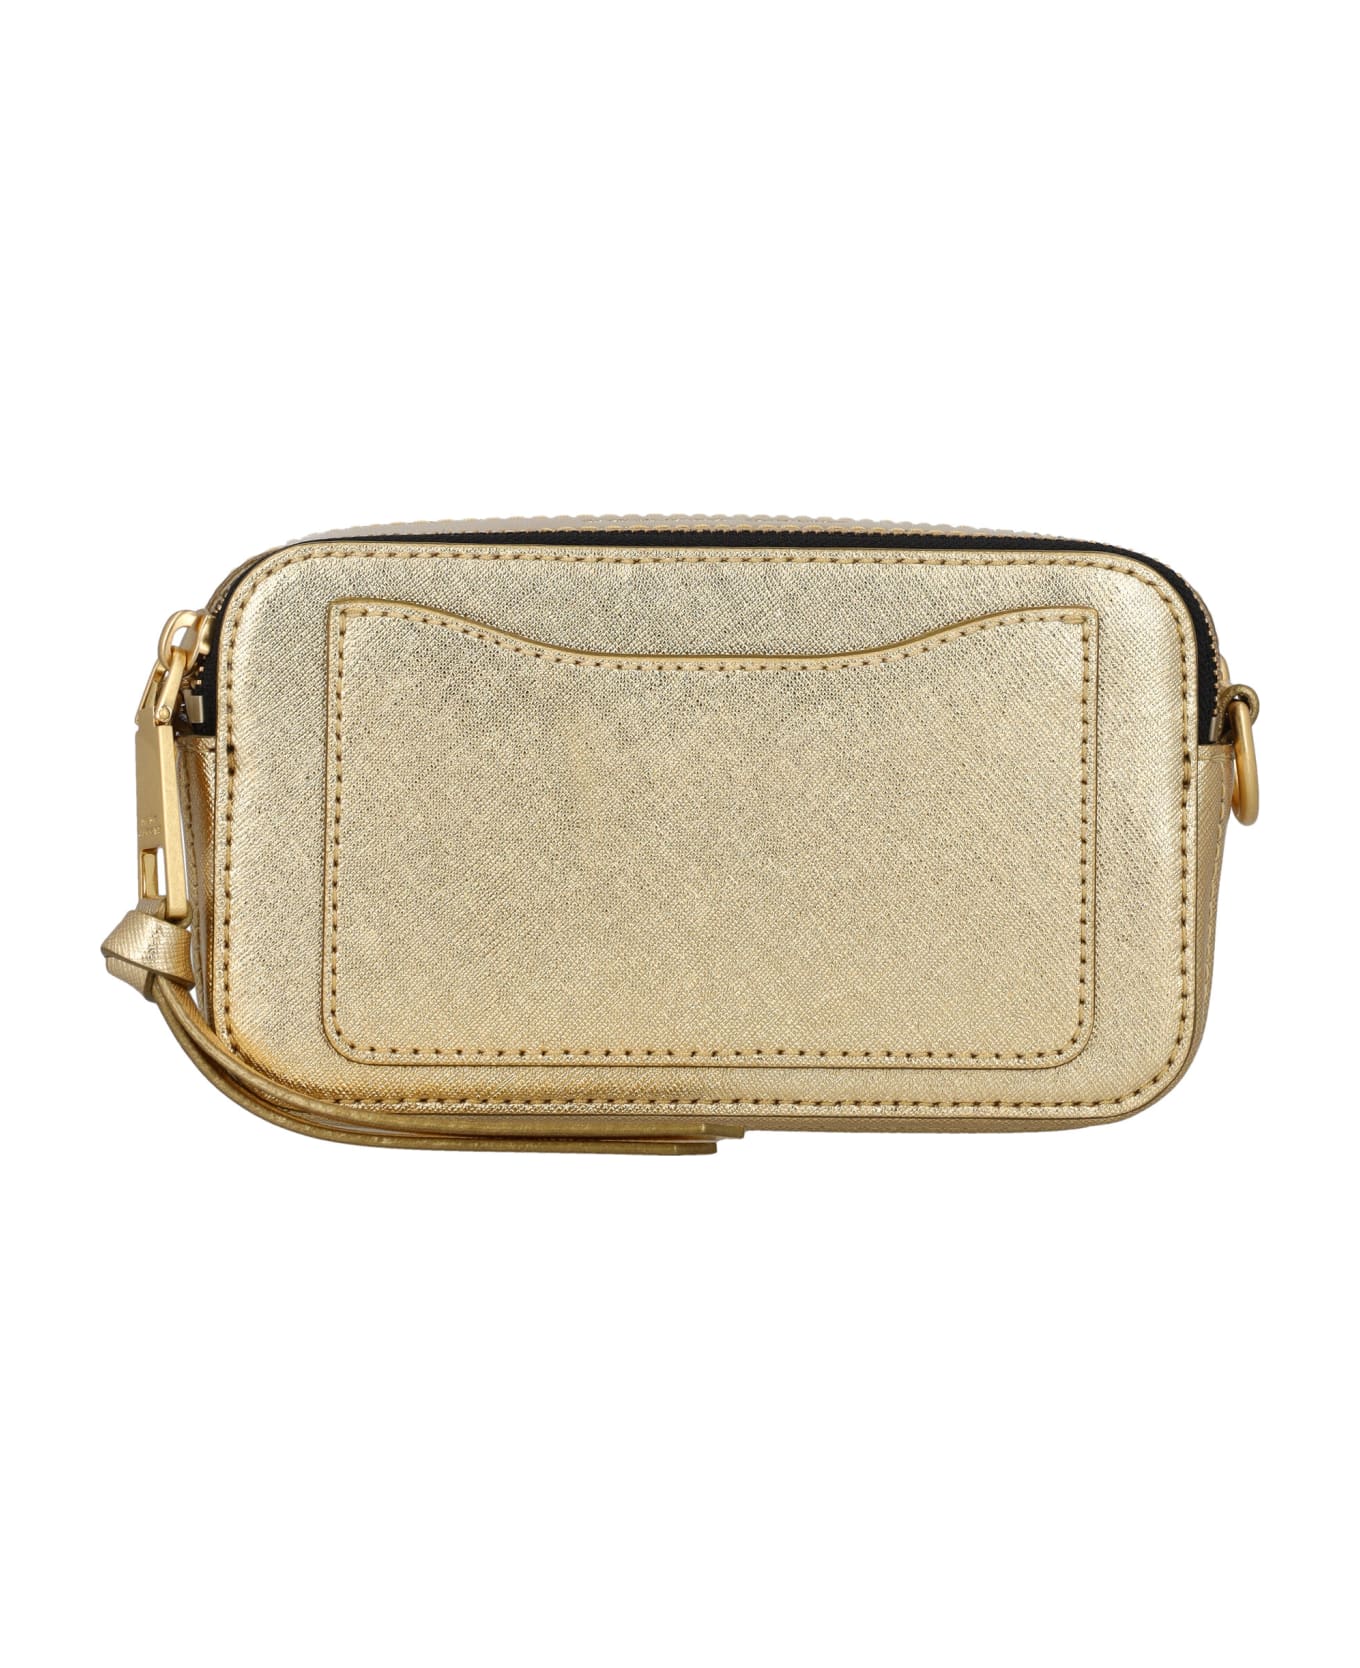 Marc Jacobs The Snapshot Bag - GOLD ショルダーバッグ